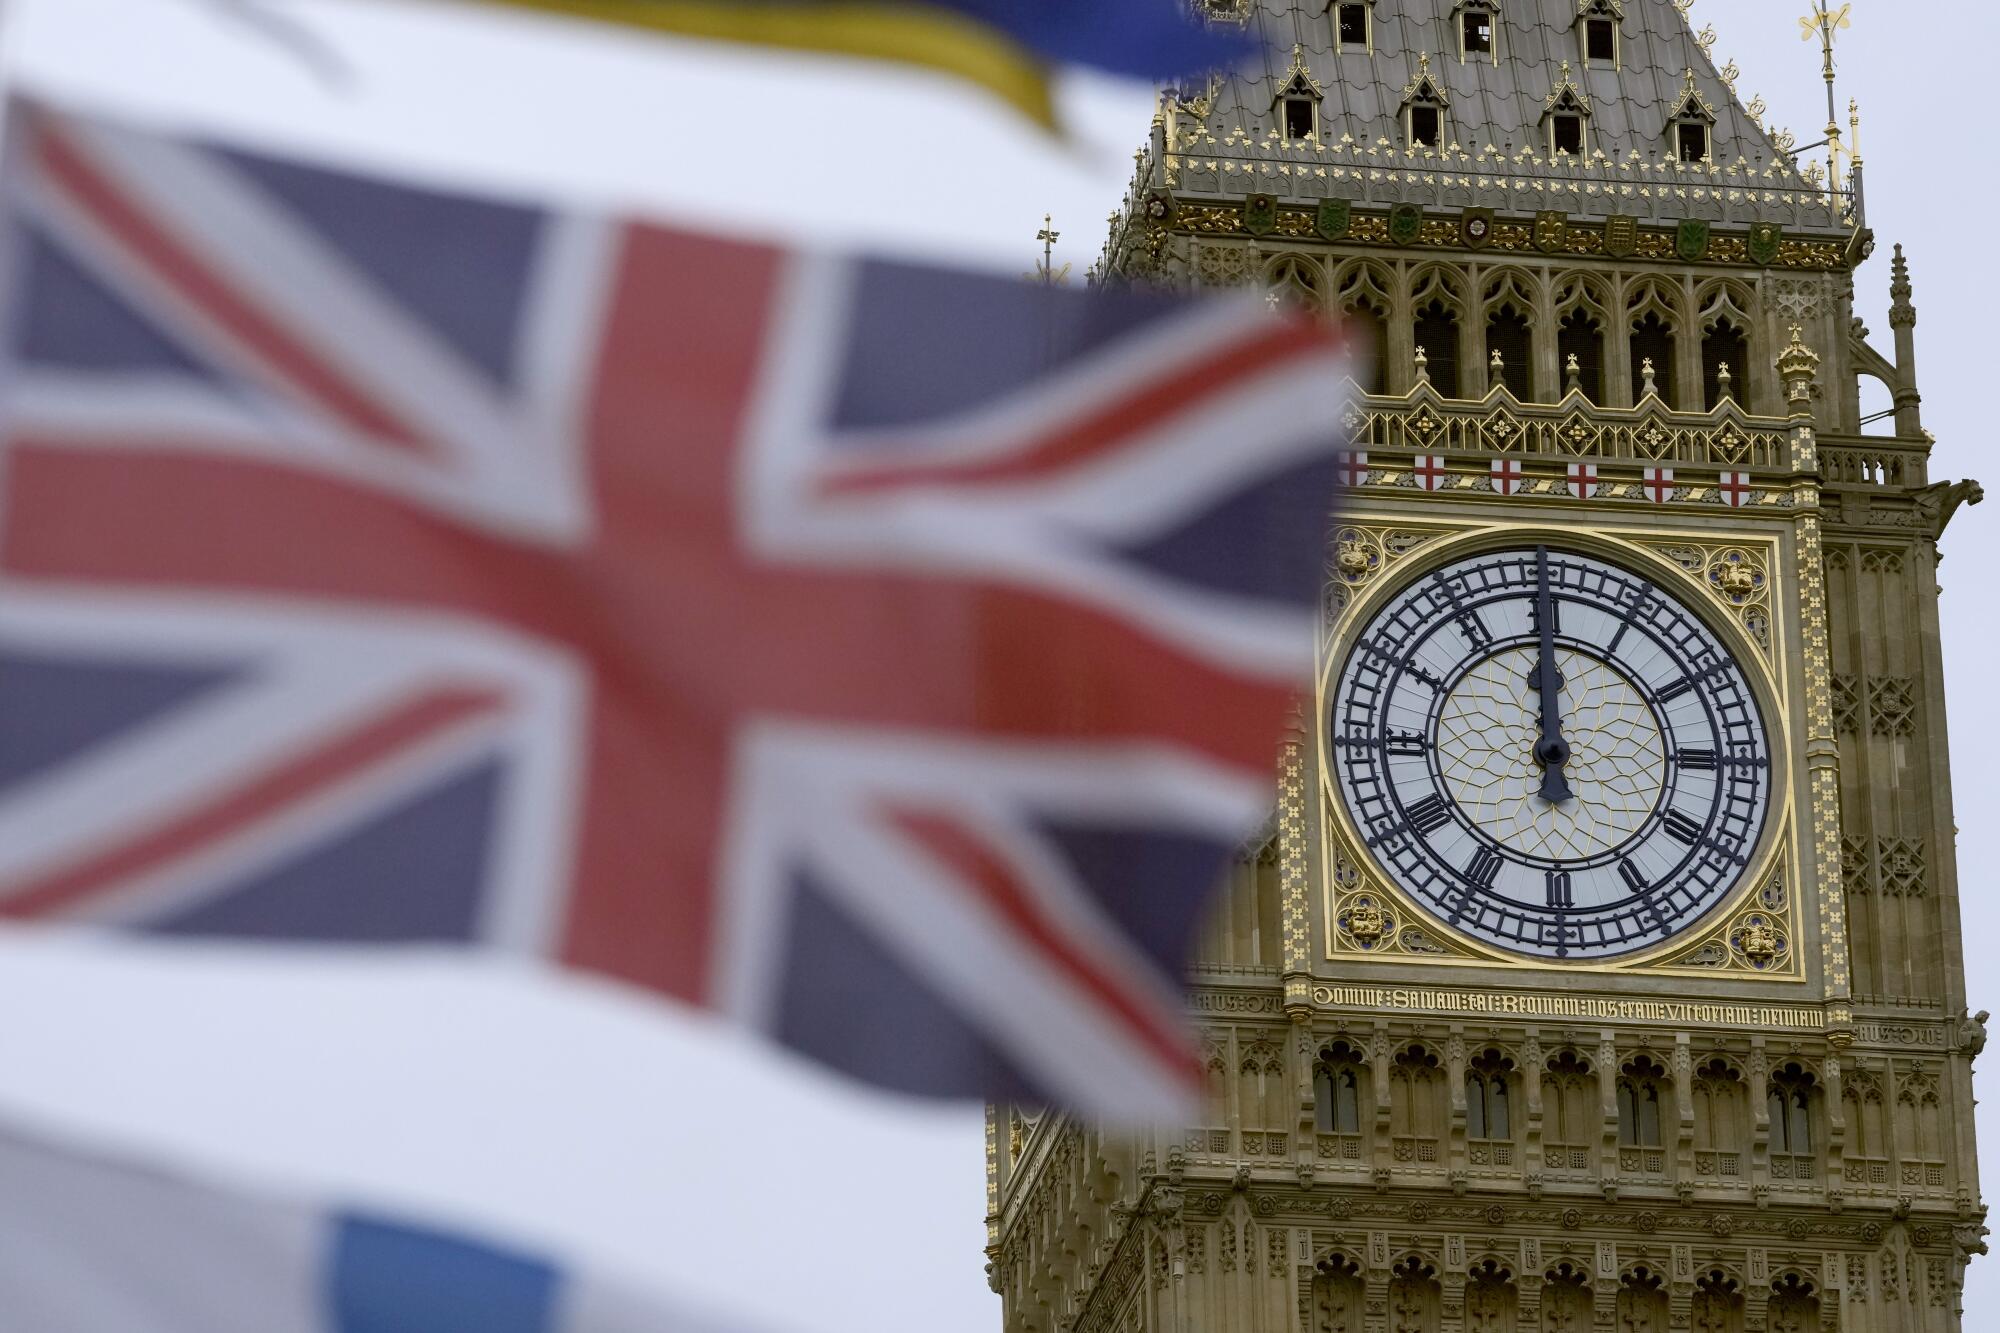 A British flag flies in the foreground in front of Big Ben.